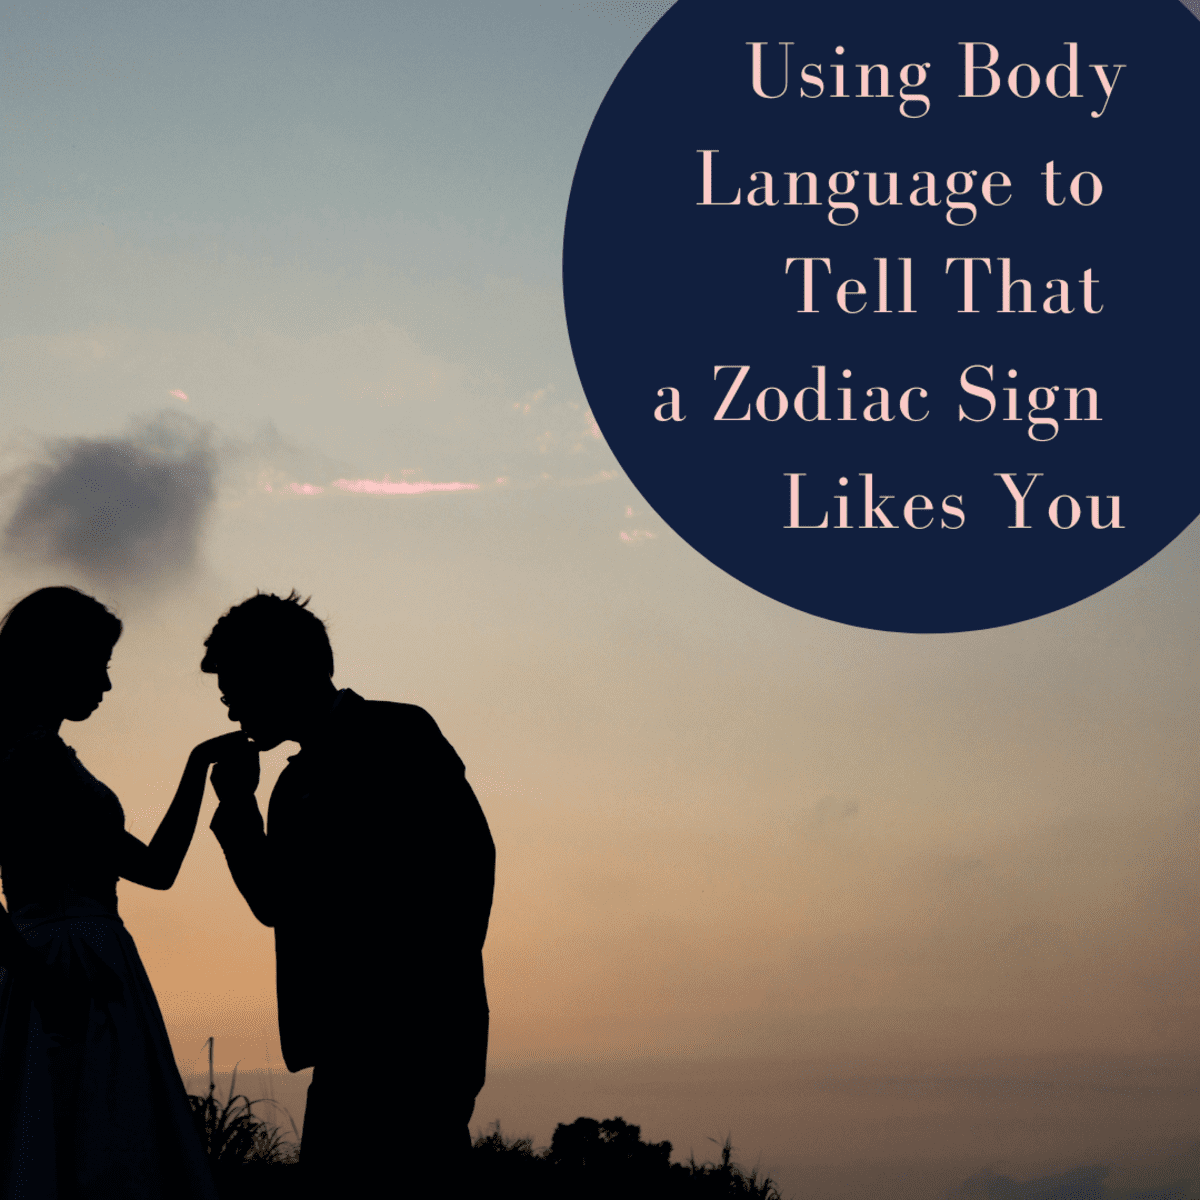 Signs Your Zodiac Crush Likes You Through Body Language: An Astrological  Guide to Flirting - PairedLife